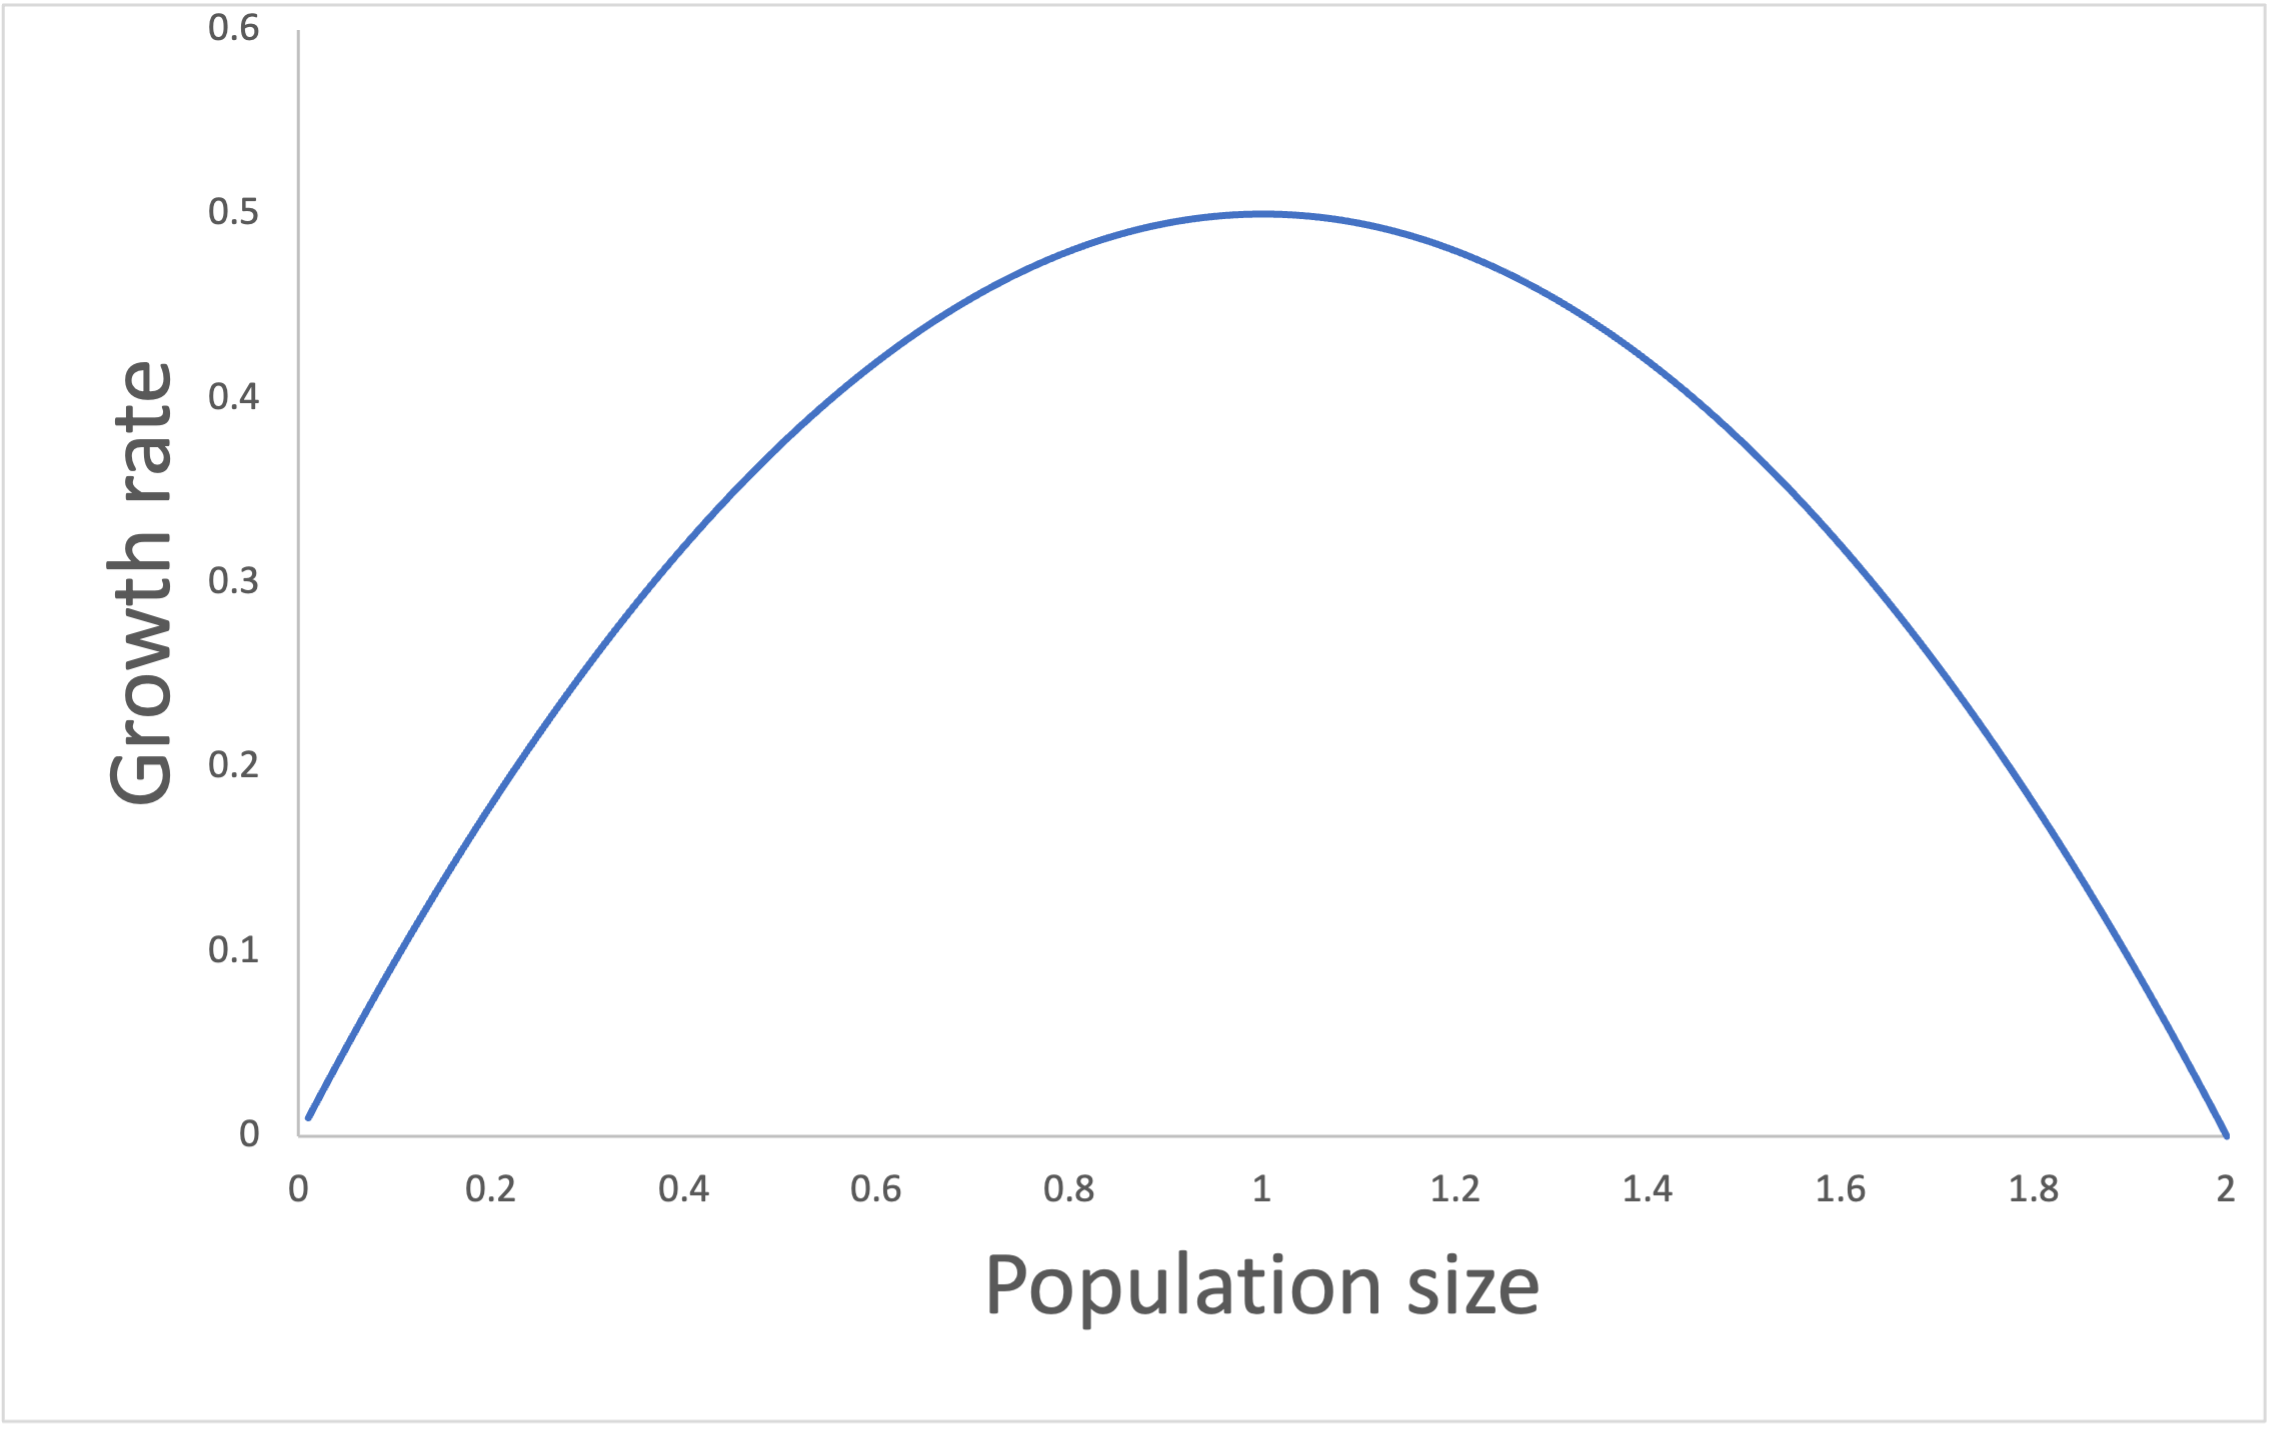 Population growth rate (dN/dt) as a function of population size (N) for the logistic growth model. The figure showed a dome-shaped parabola with maximum growth rate of half of the population carrying capacity, and zero growth when the population is a zero as well as when it is at its carrying capacity.